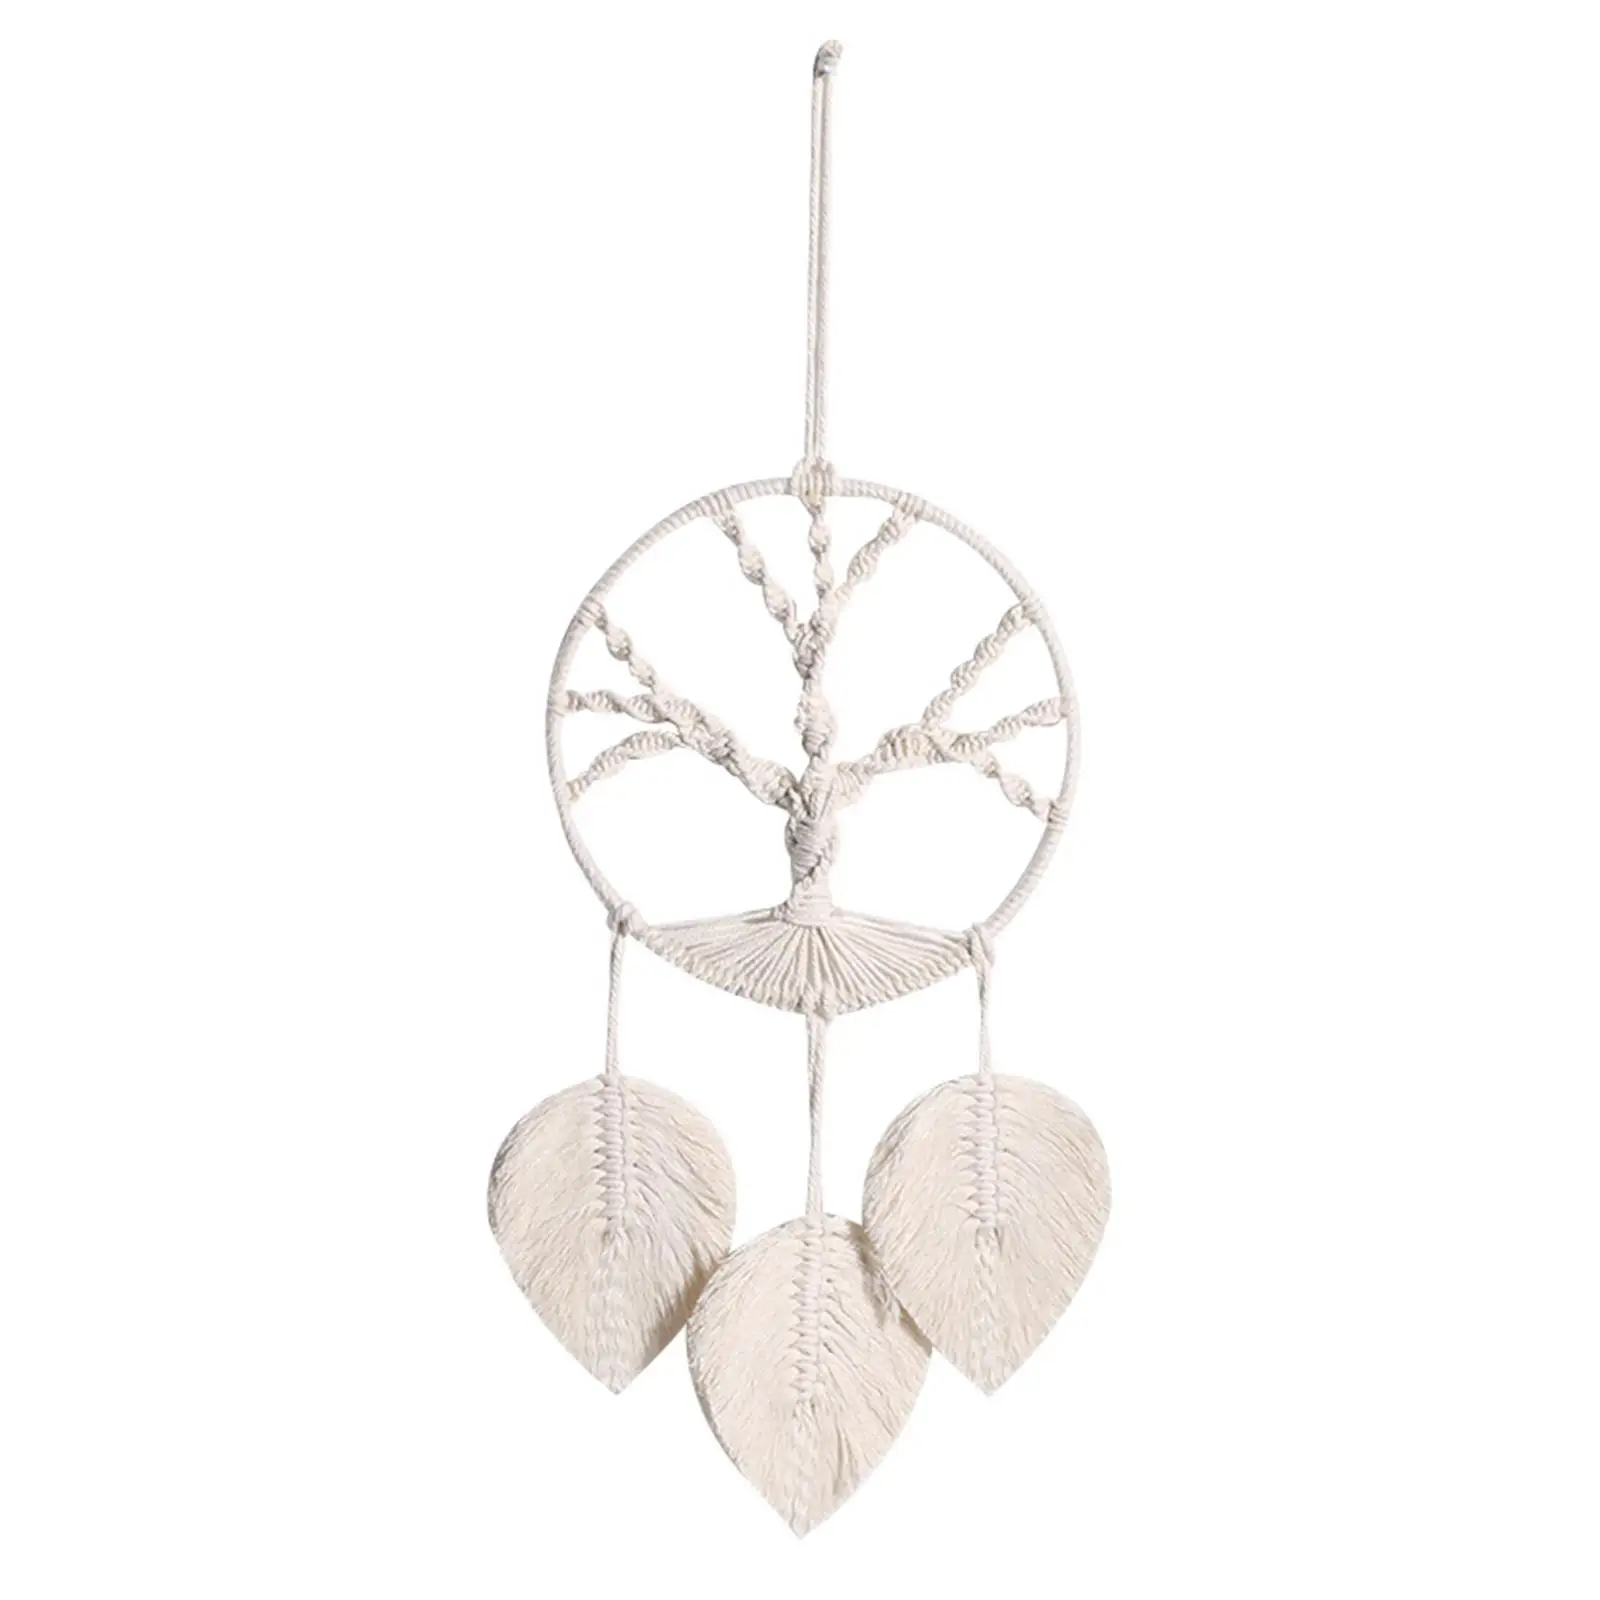 Dream Catcher Tapestry Pendant Exquisite Durable Handwoven Craft Wall Hanging